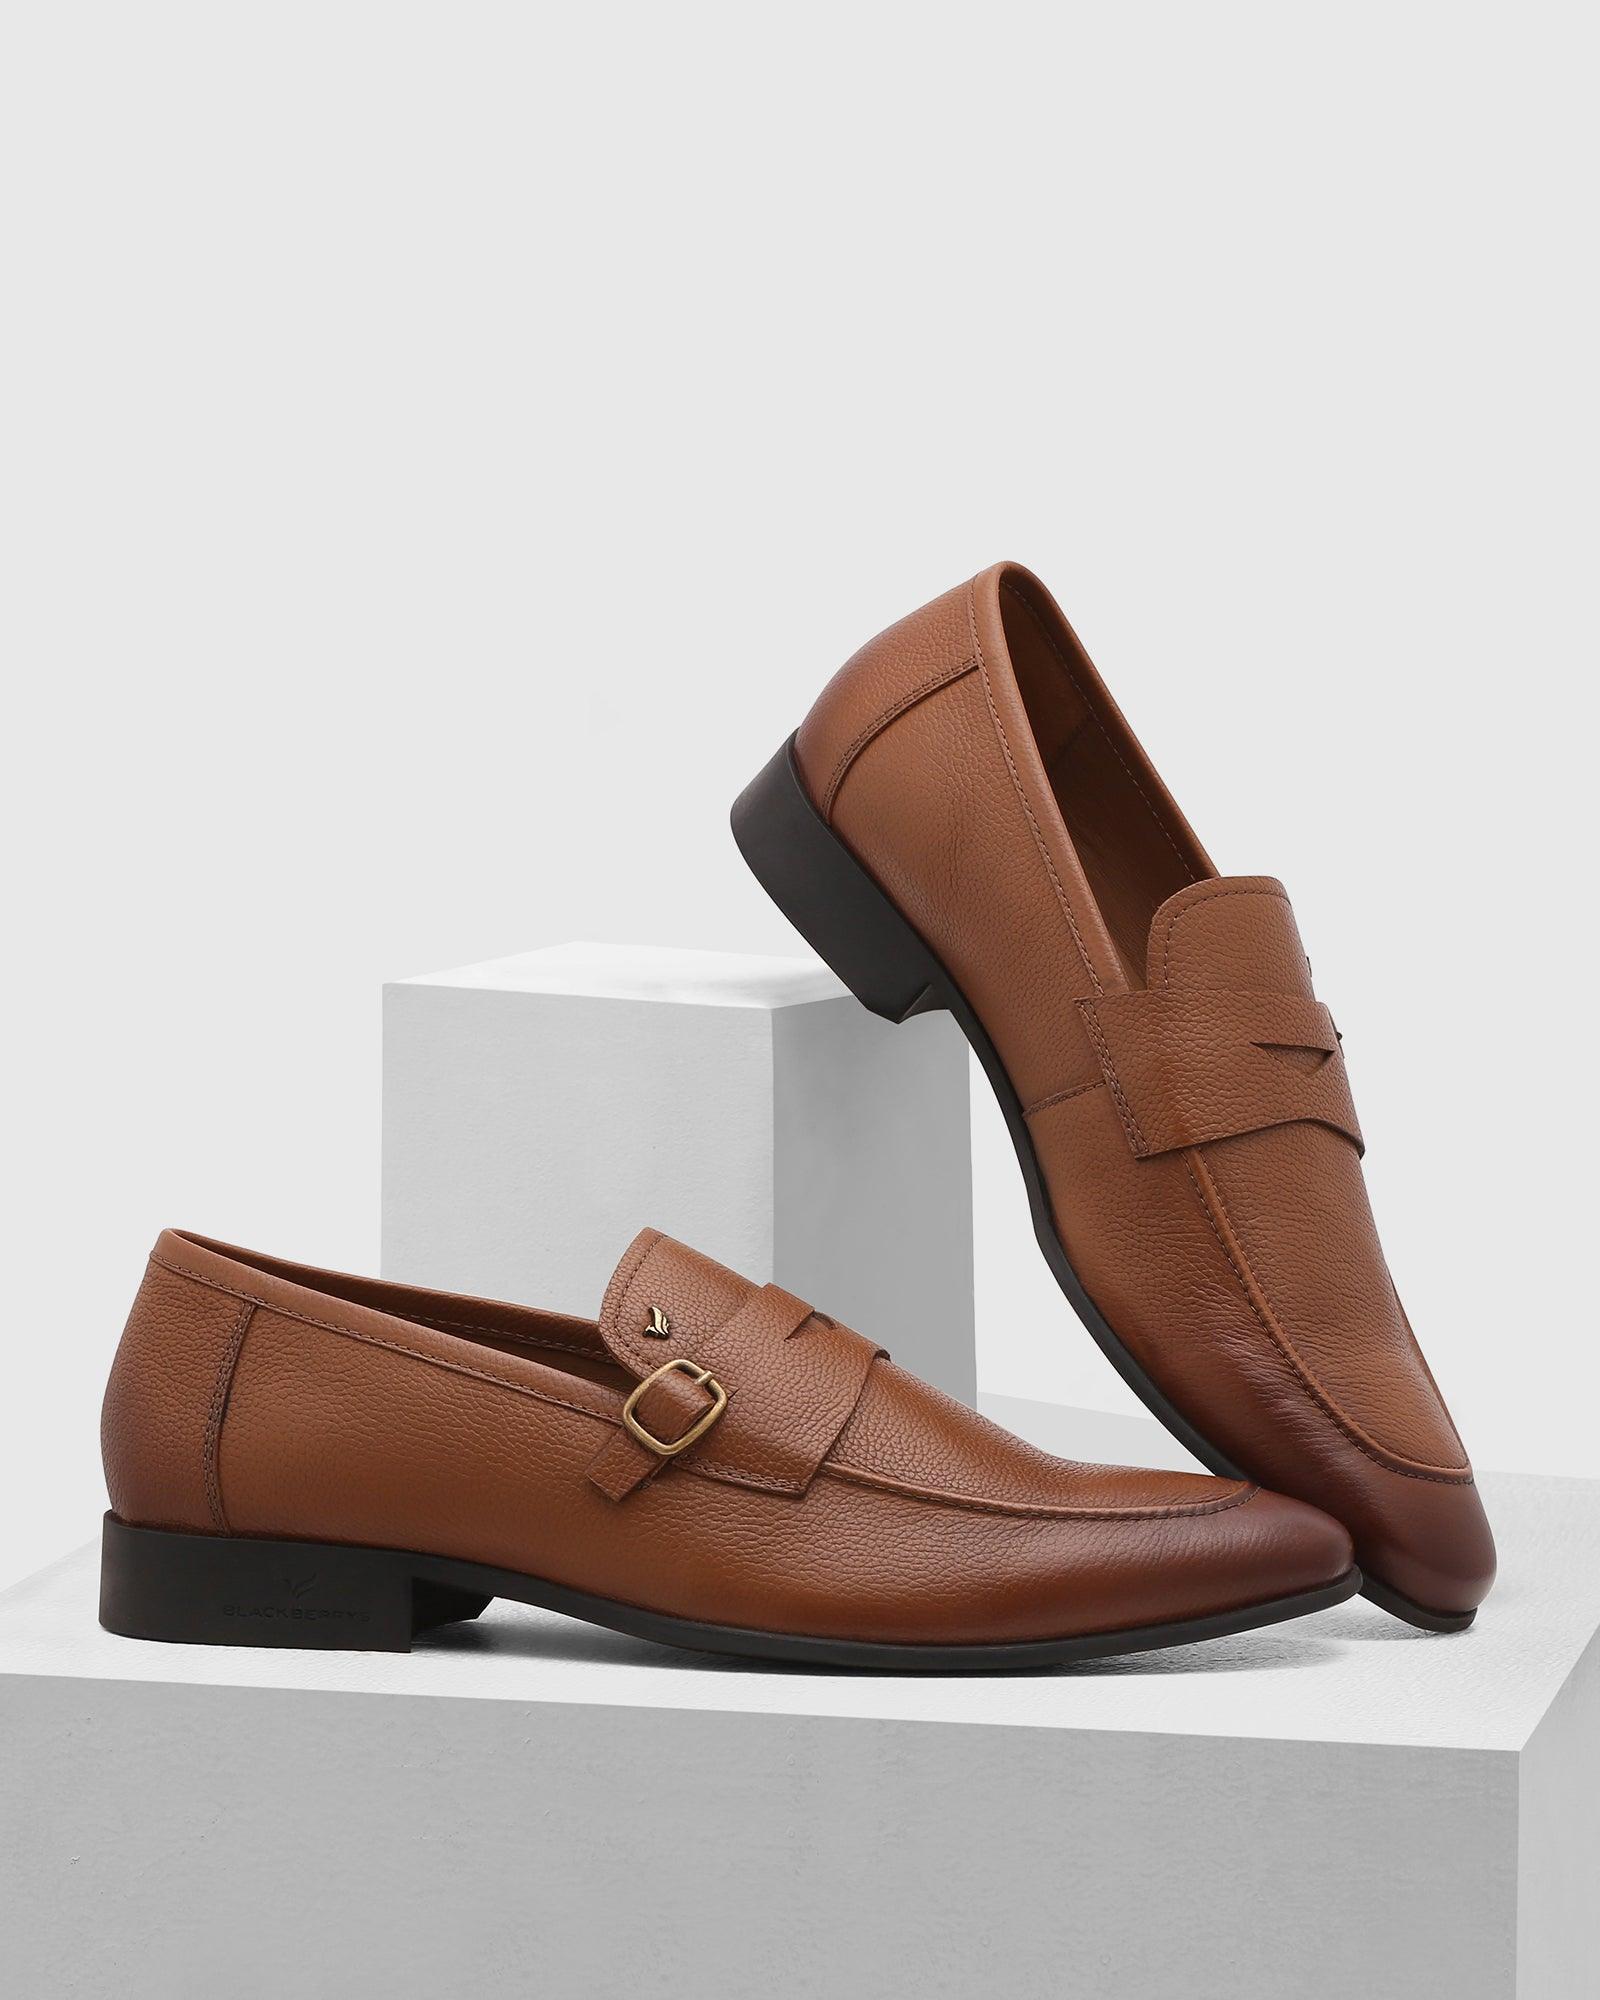 textured leather slip on shoes in tan (qatar)